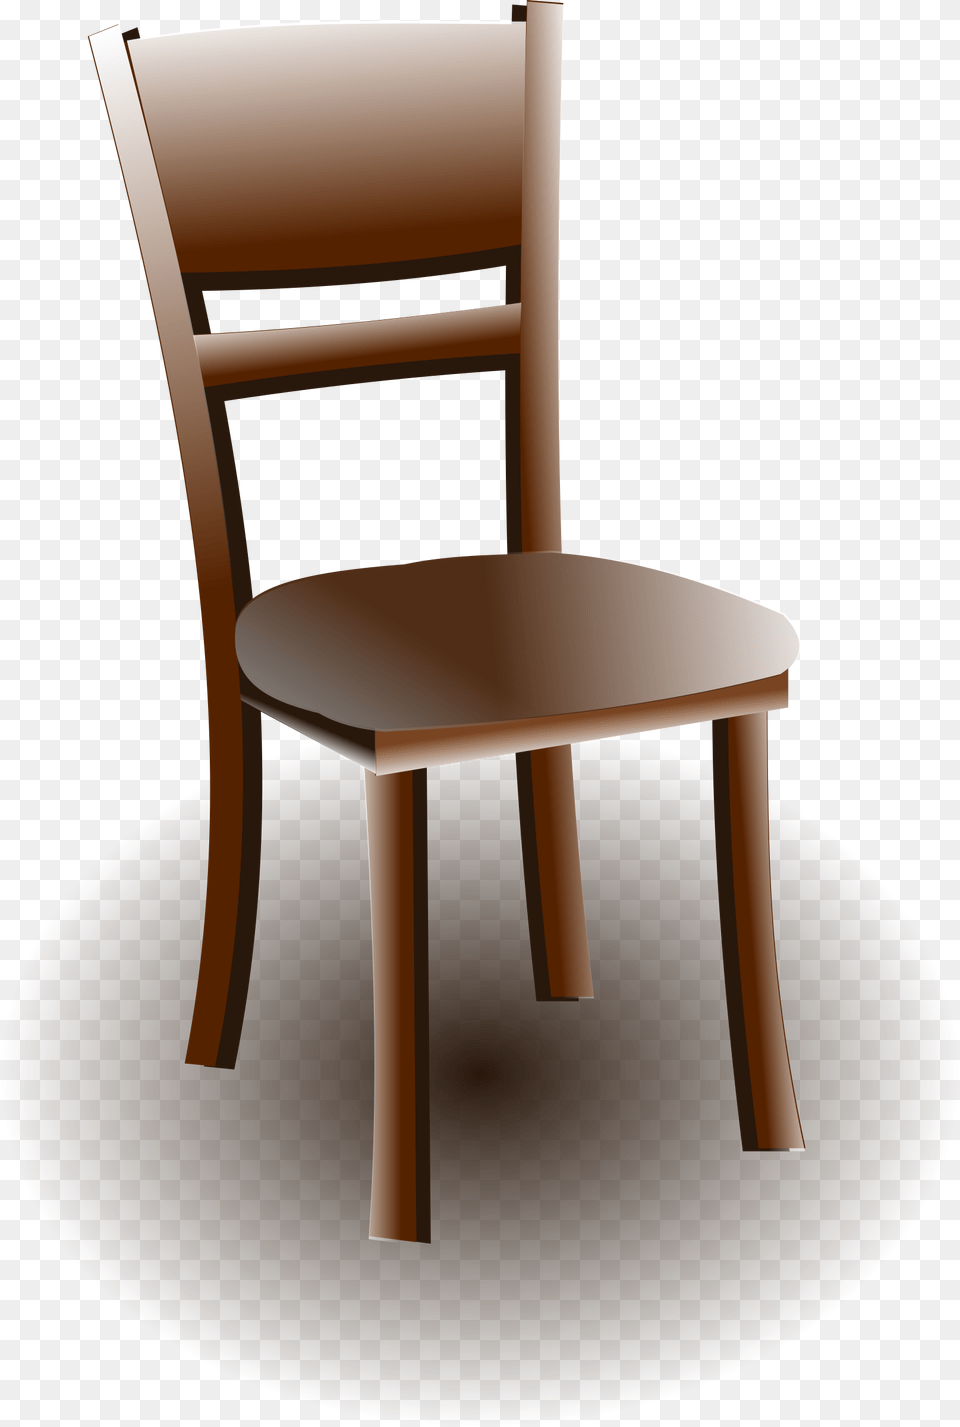 Big Image Chair Clip Art, Furniture Png